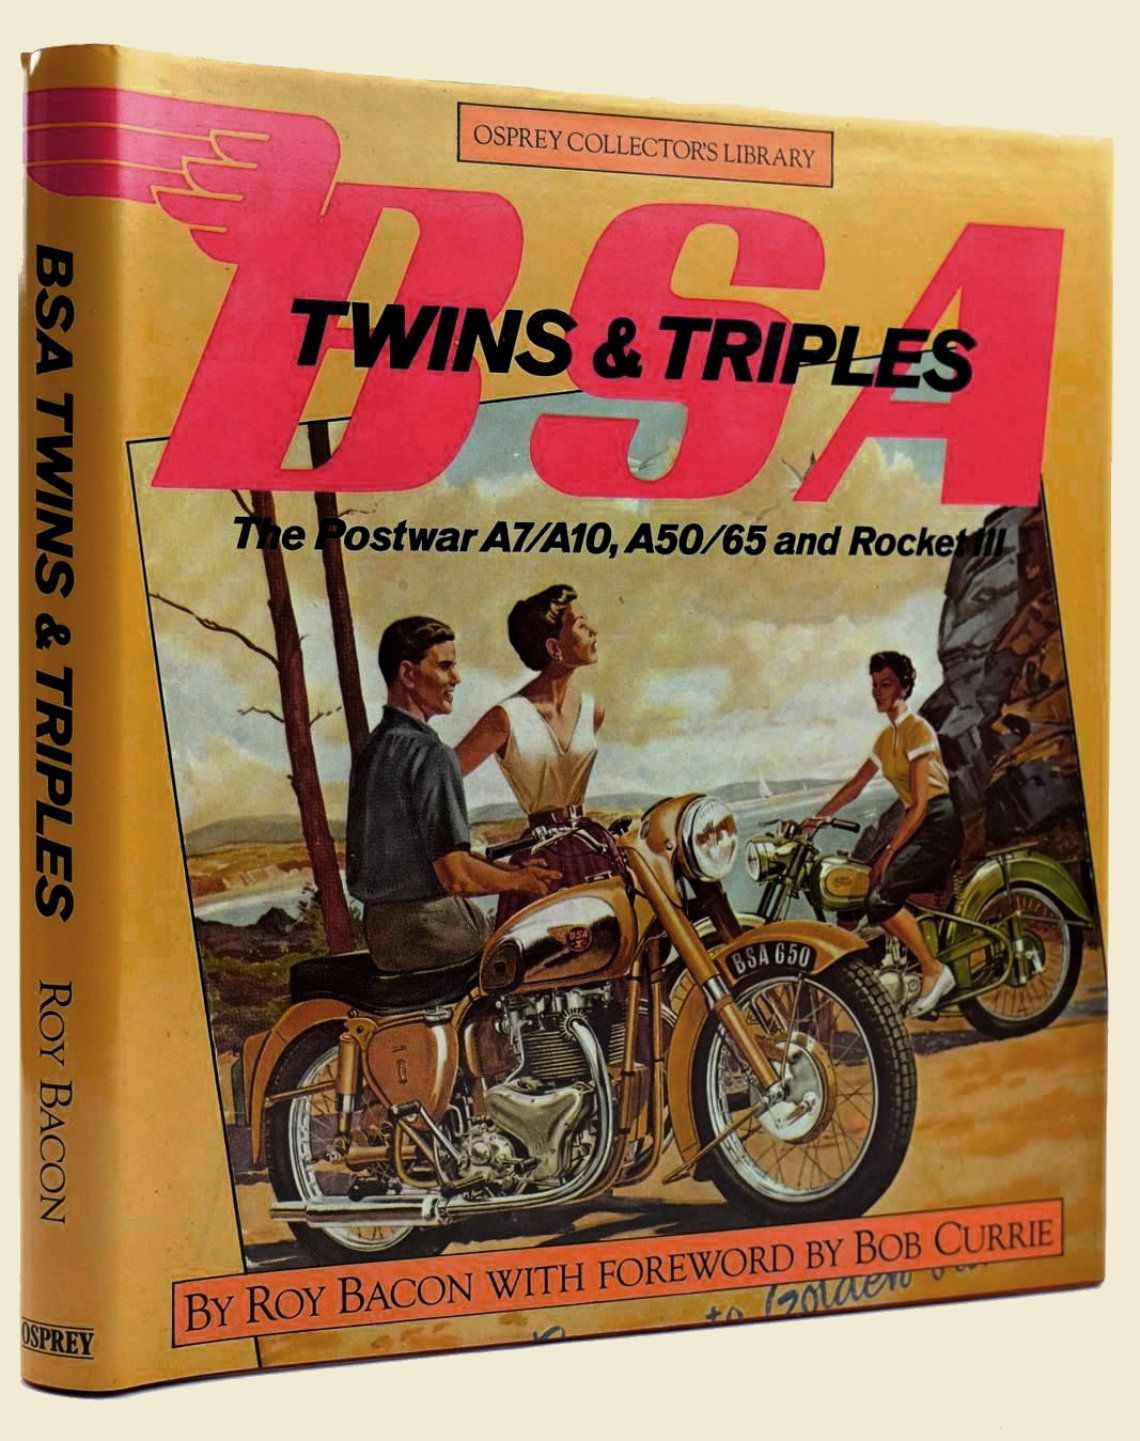 BSA TWINS AND TRIPLES by Roy Bacon